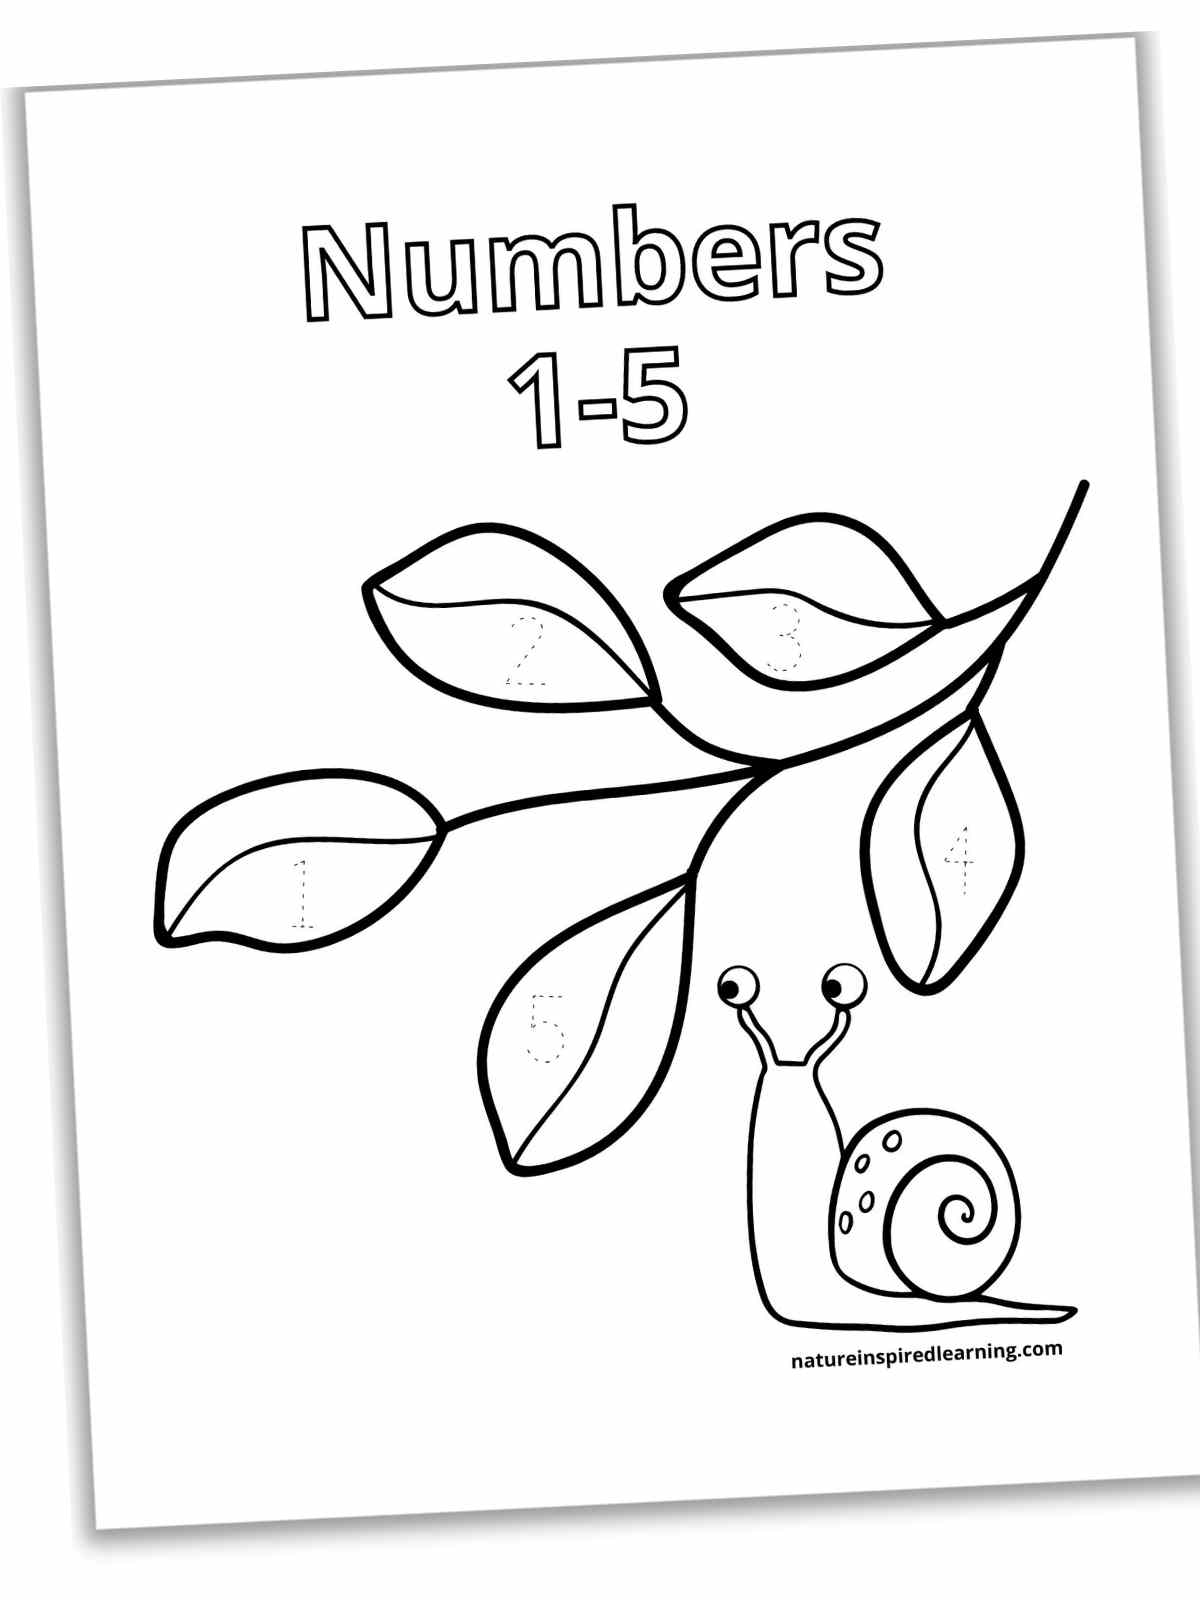 slanted black and white worksheet with a title across the top a branch with five leaves and a snail under the leaves. One number within each leaf in a dotted font.